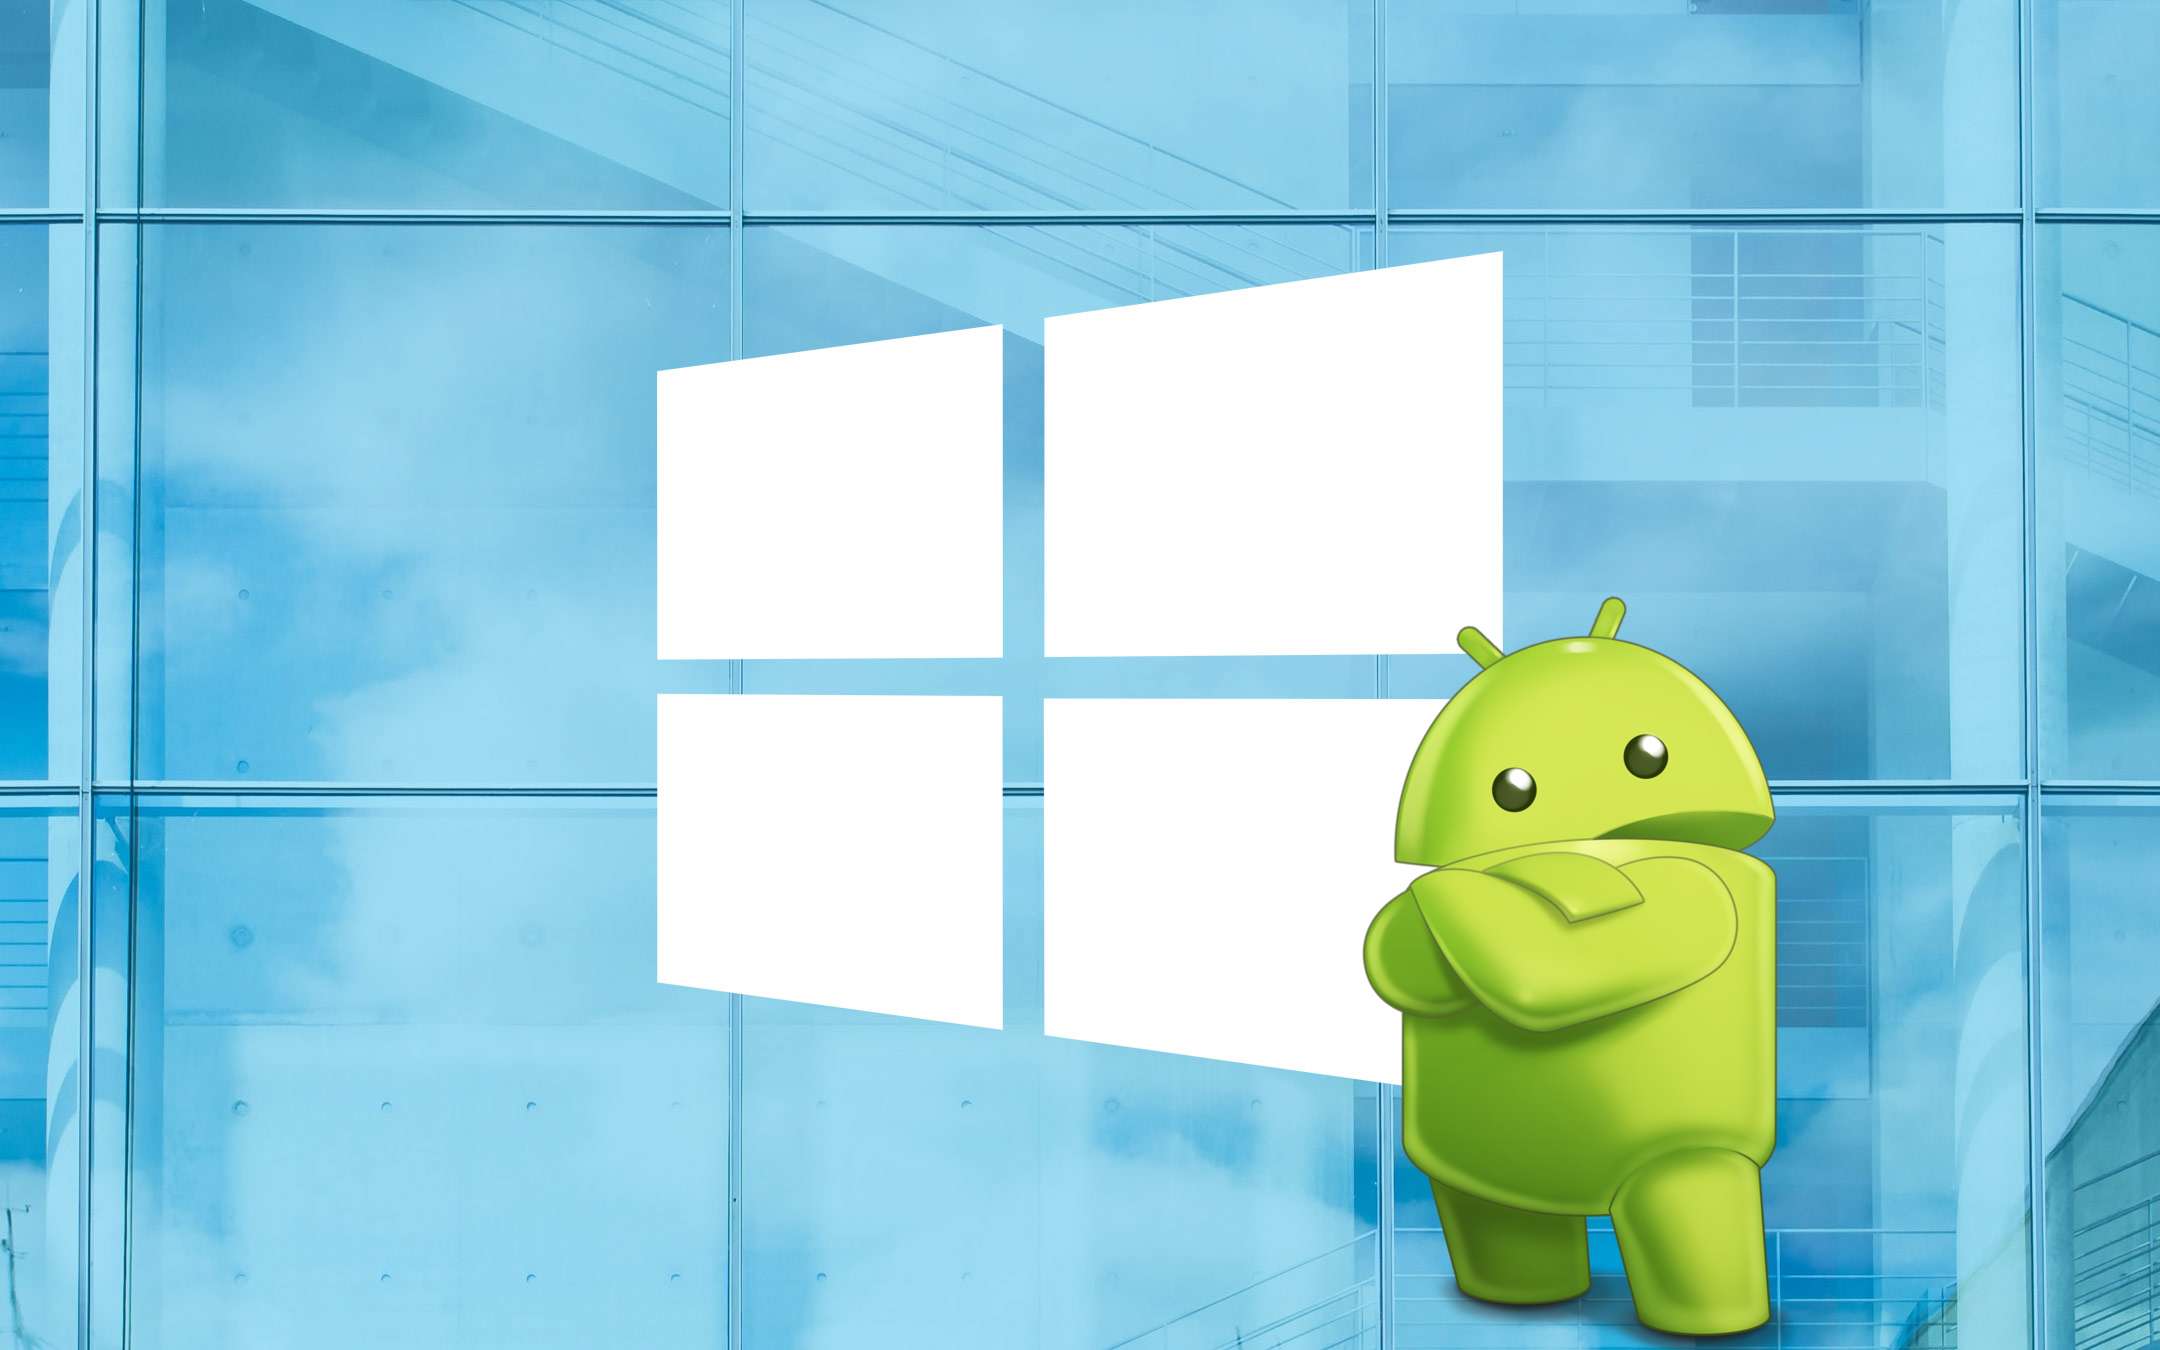 How to run Android apps on Windows 10